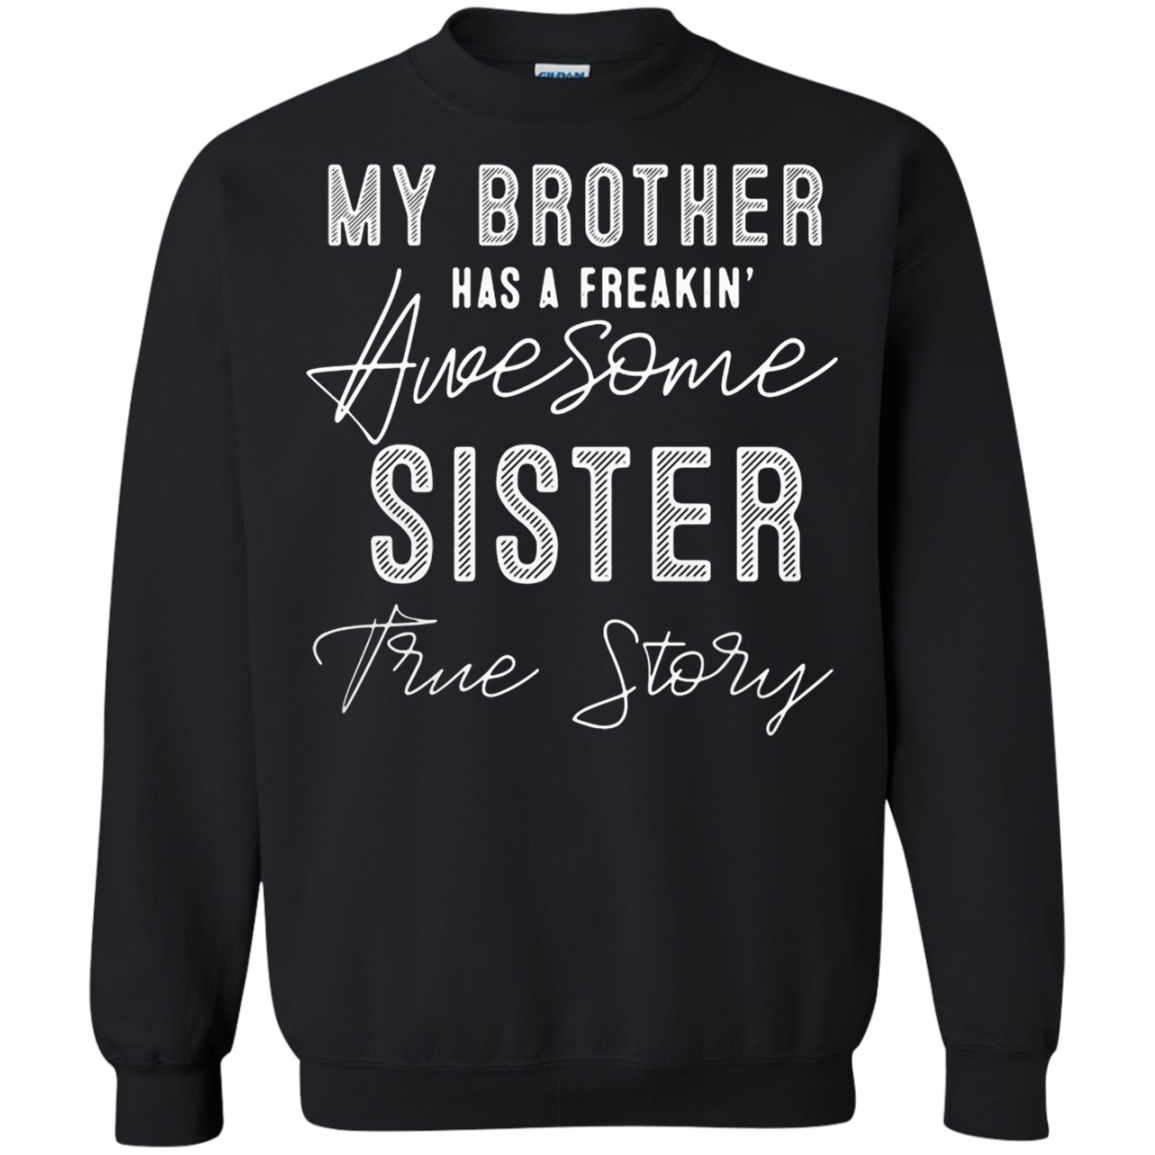 My Bbrother Has A Freakin Awesome Sister True Story Shirt G180 Crewneck Pullover 8 Oz.